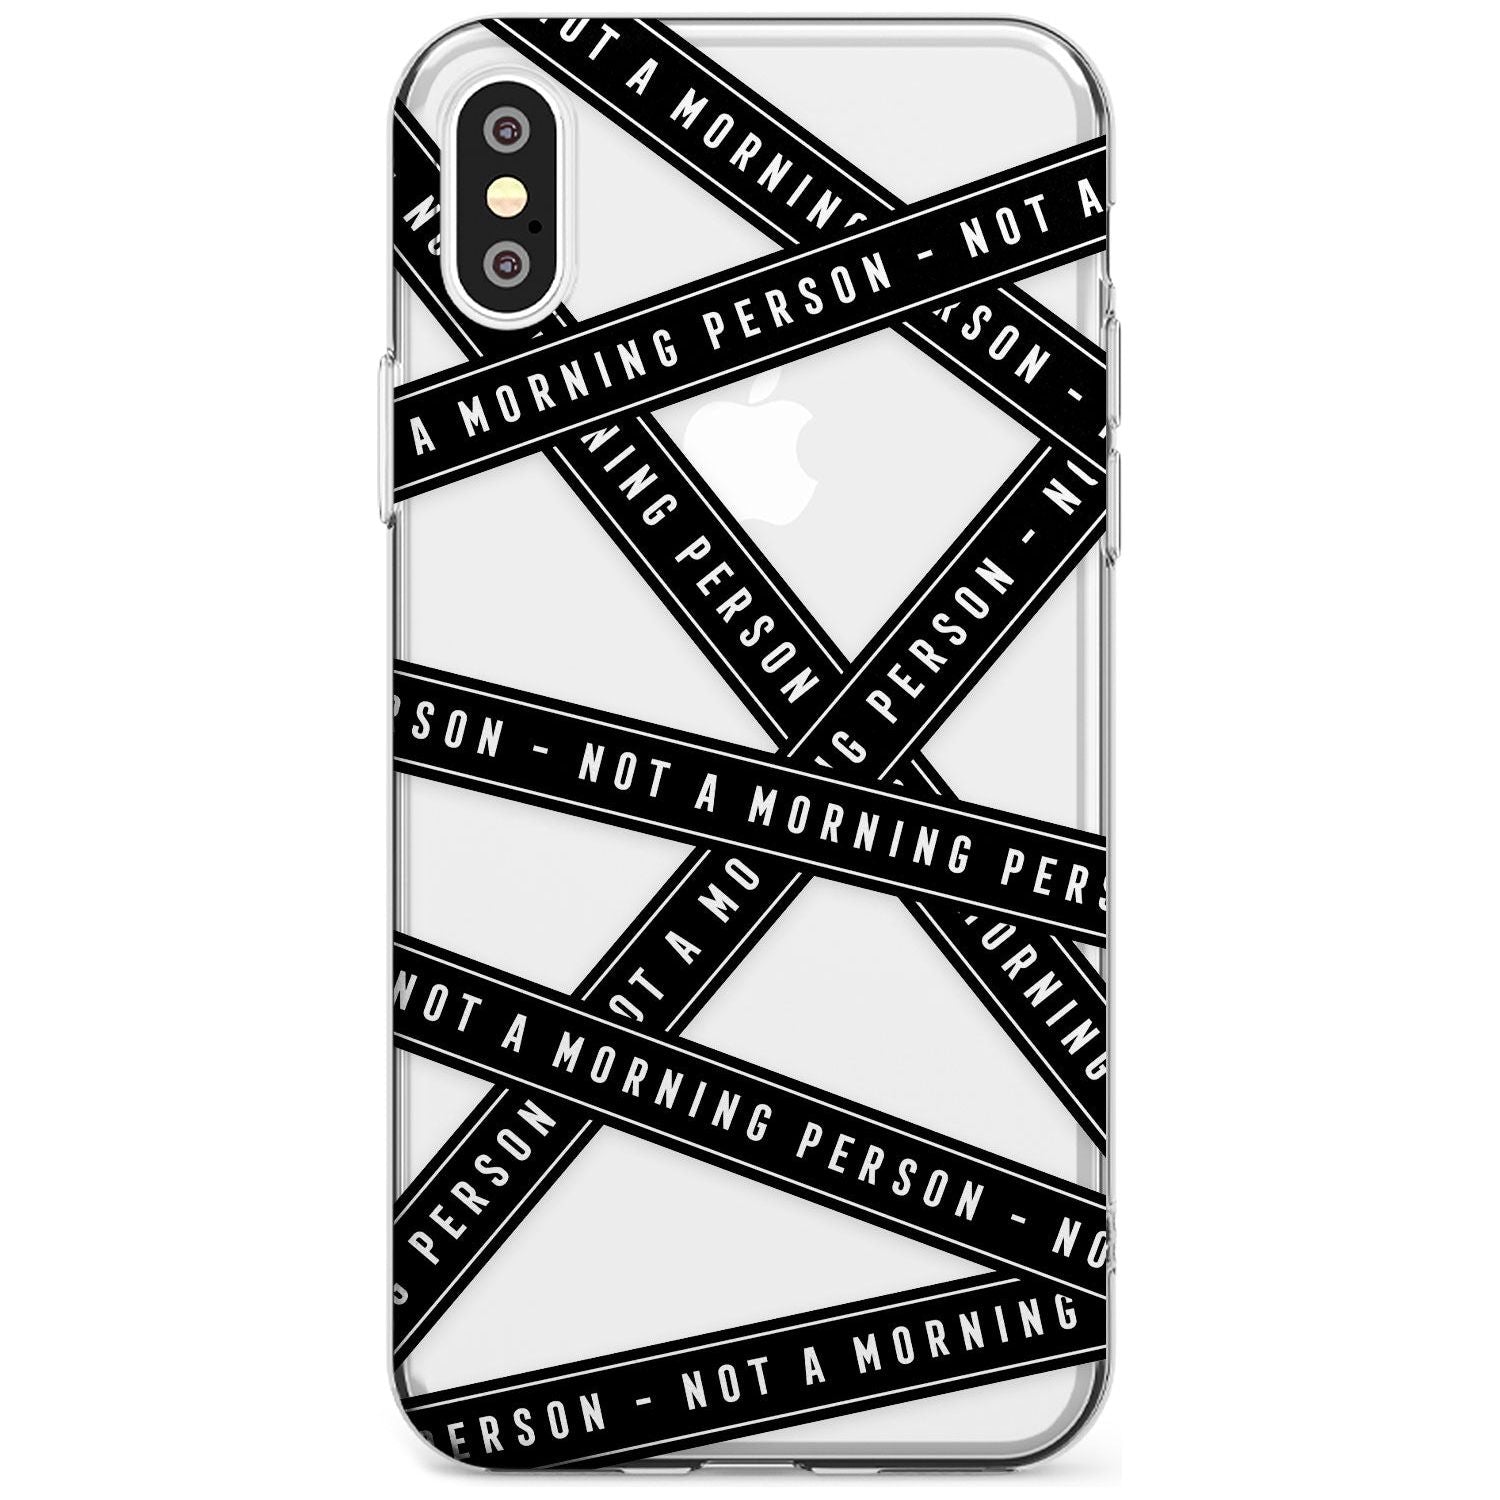 Caution Tape (Clear) Not a Morning Person Slim TPU Phone Case Warehouse X XS Max XR